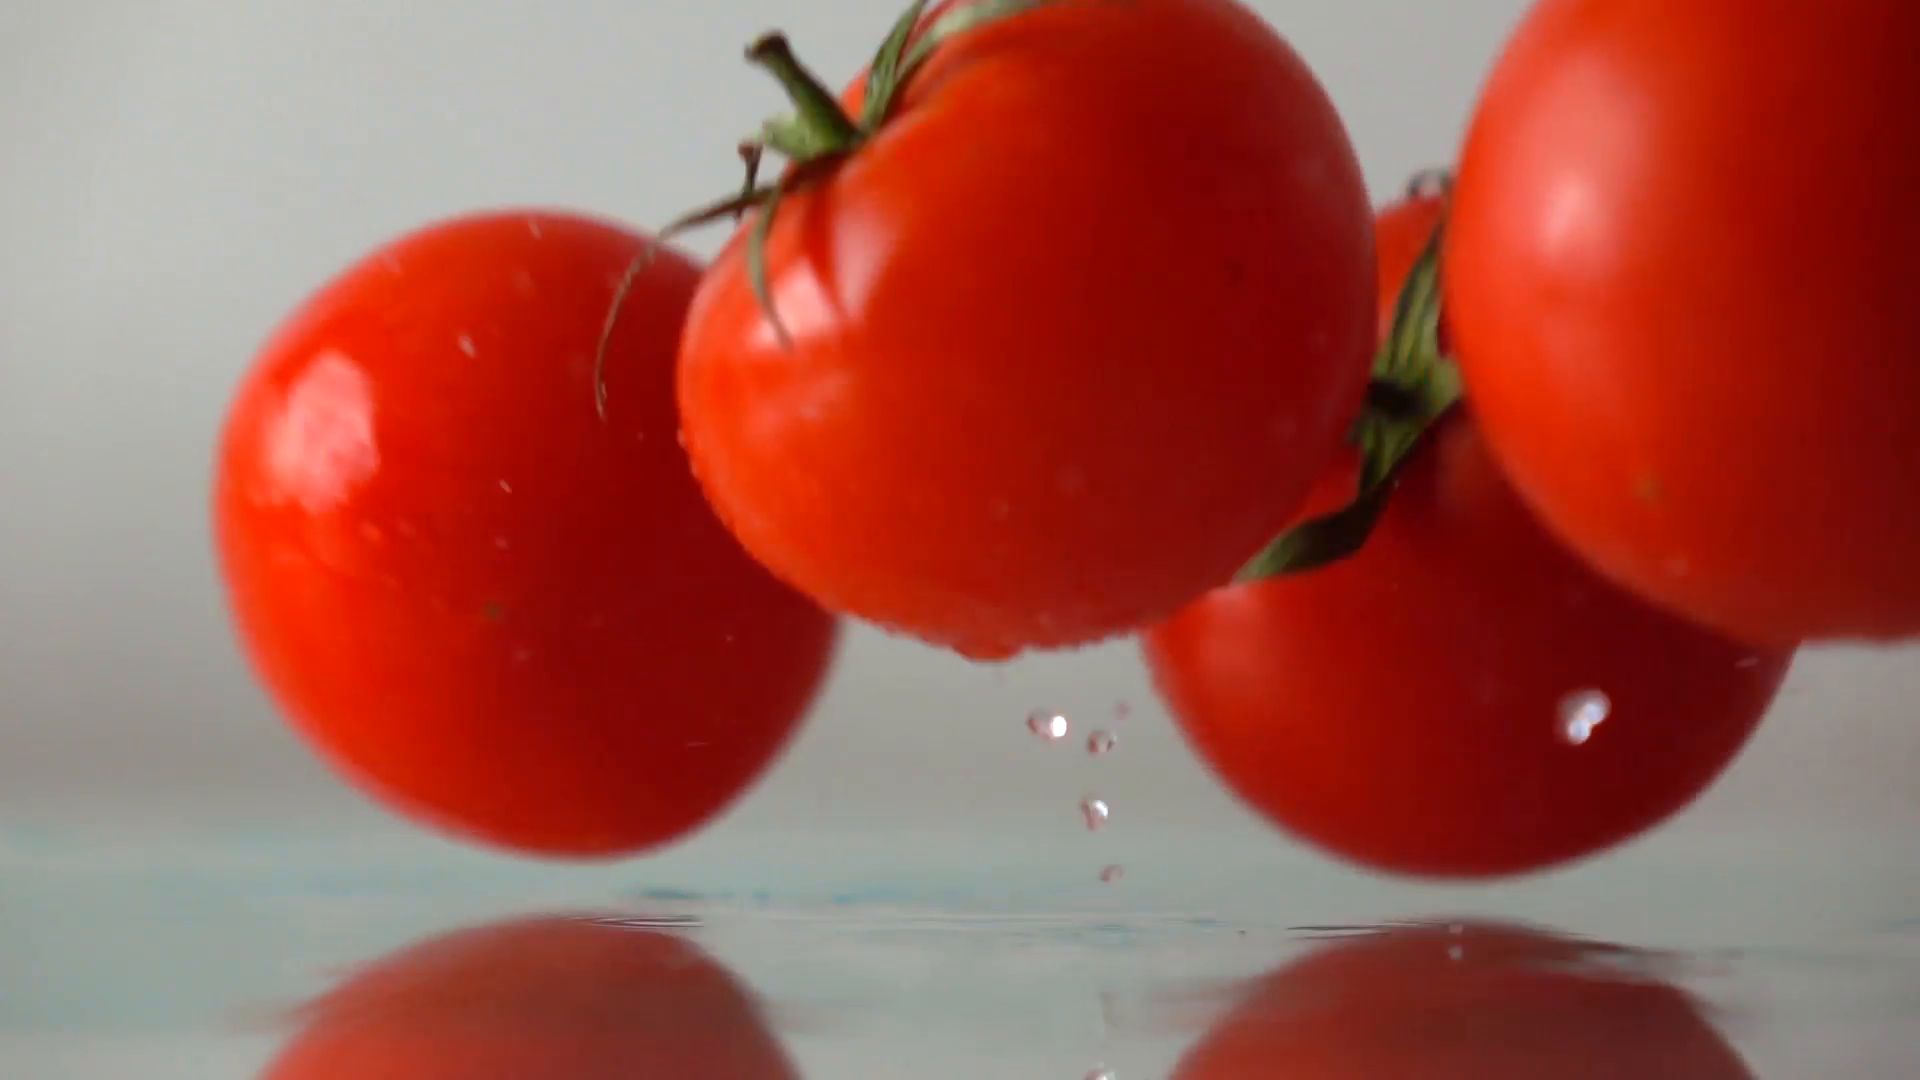 Red ripe tomatoes hit wet glass surface with splashes and rebound ...